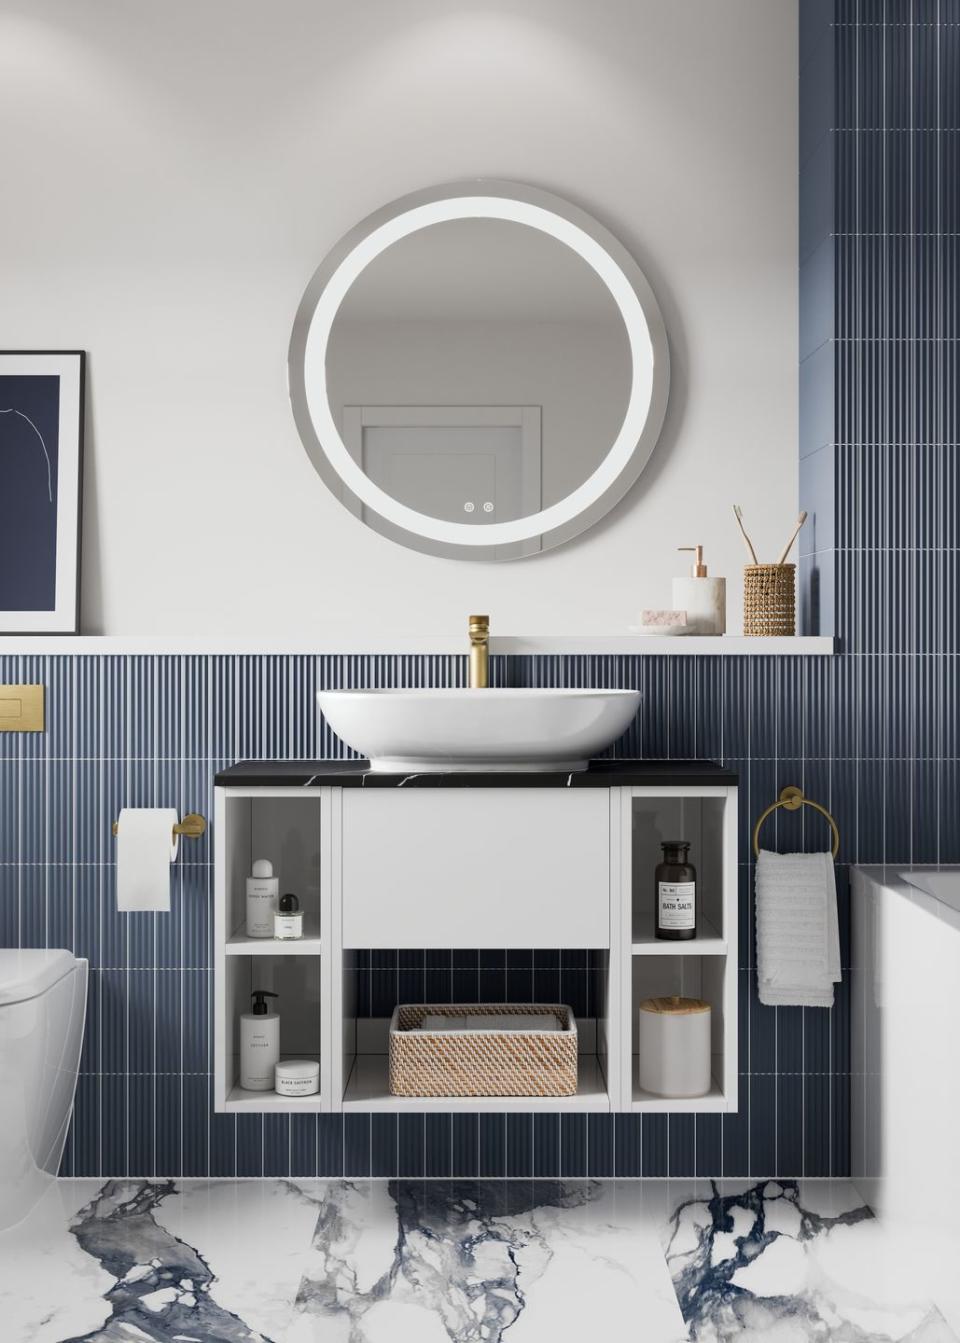 a white wall mounted sink cabinet with bathroom shelving in a blue tiled room